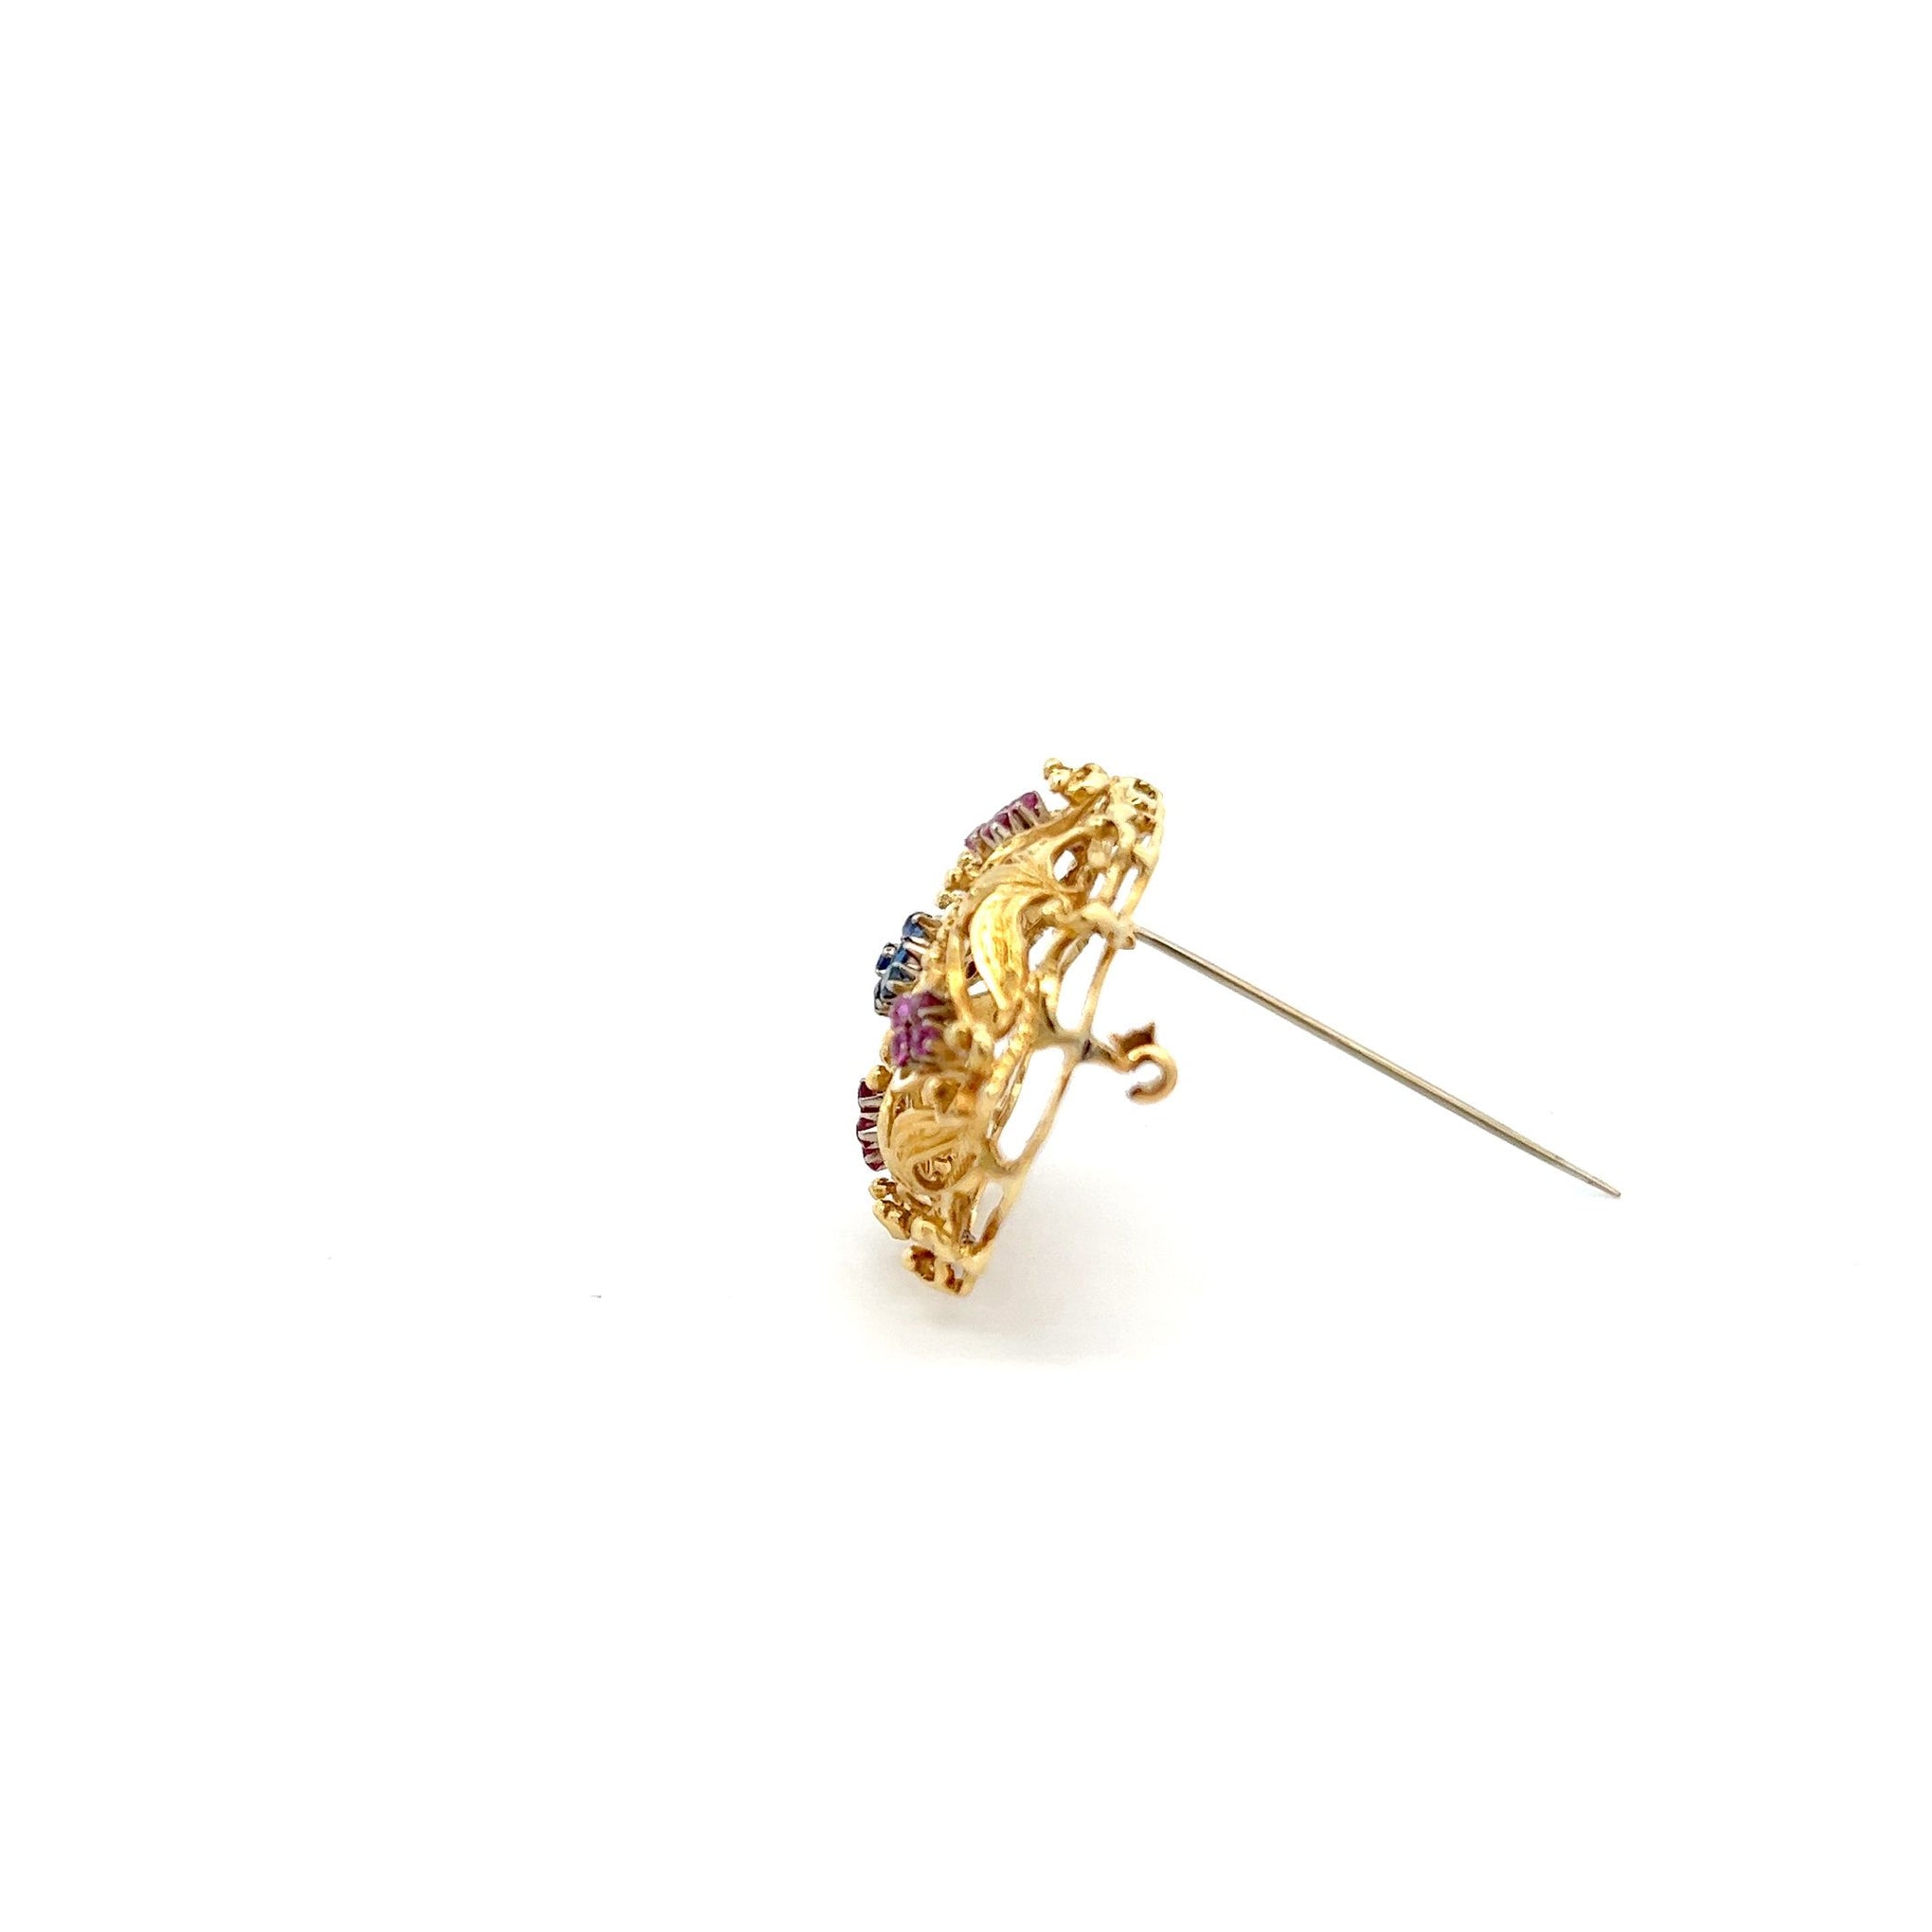 Rare Vintage Sapphire And Ruby Flower Leaf Pin